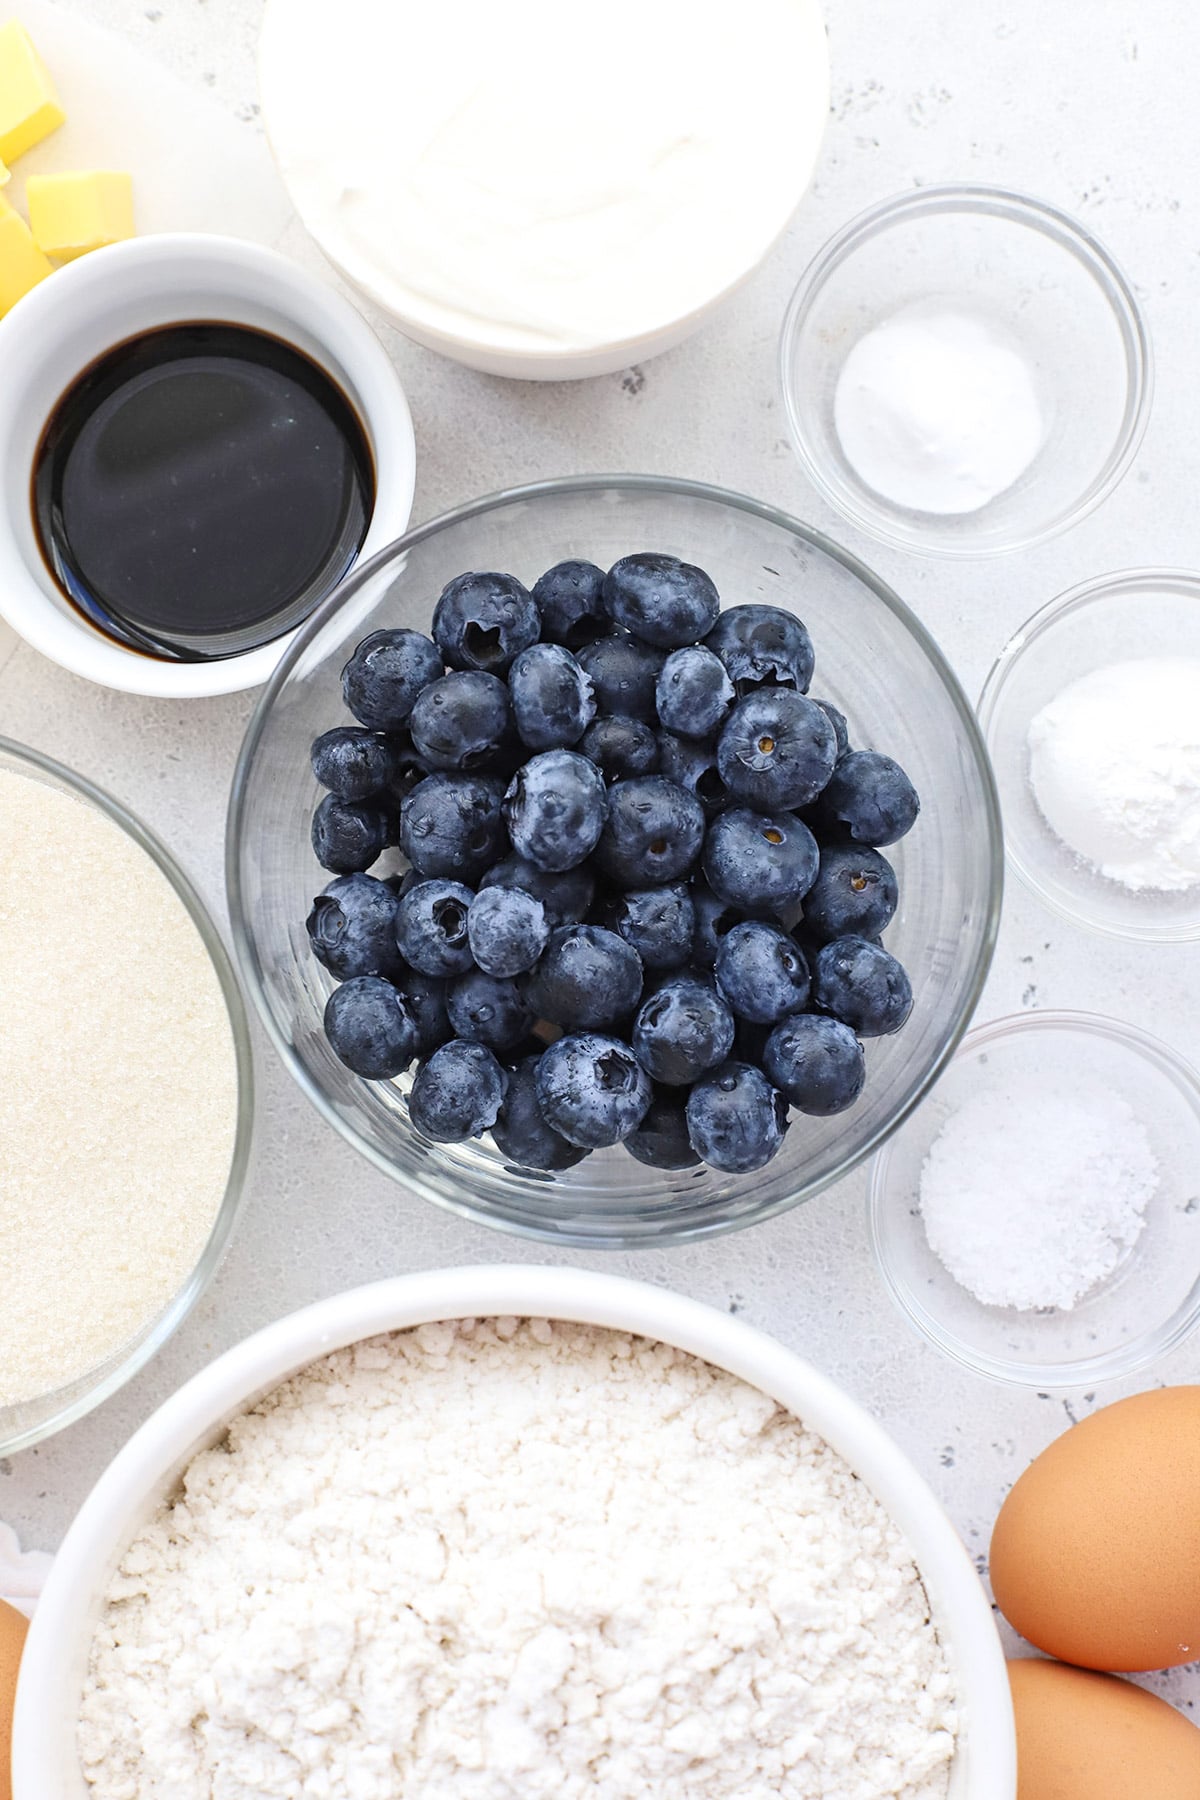 Overhead view of ingredients for gluten-free blueberry coffee cake